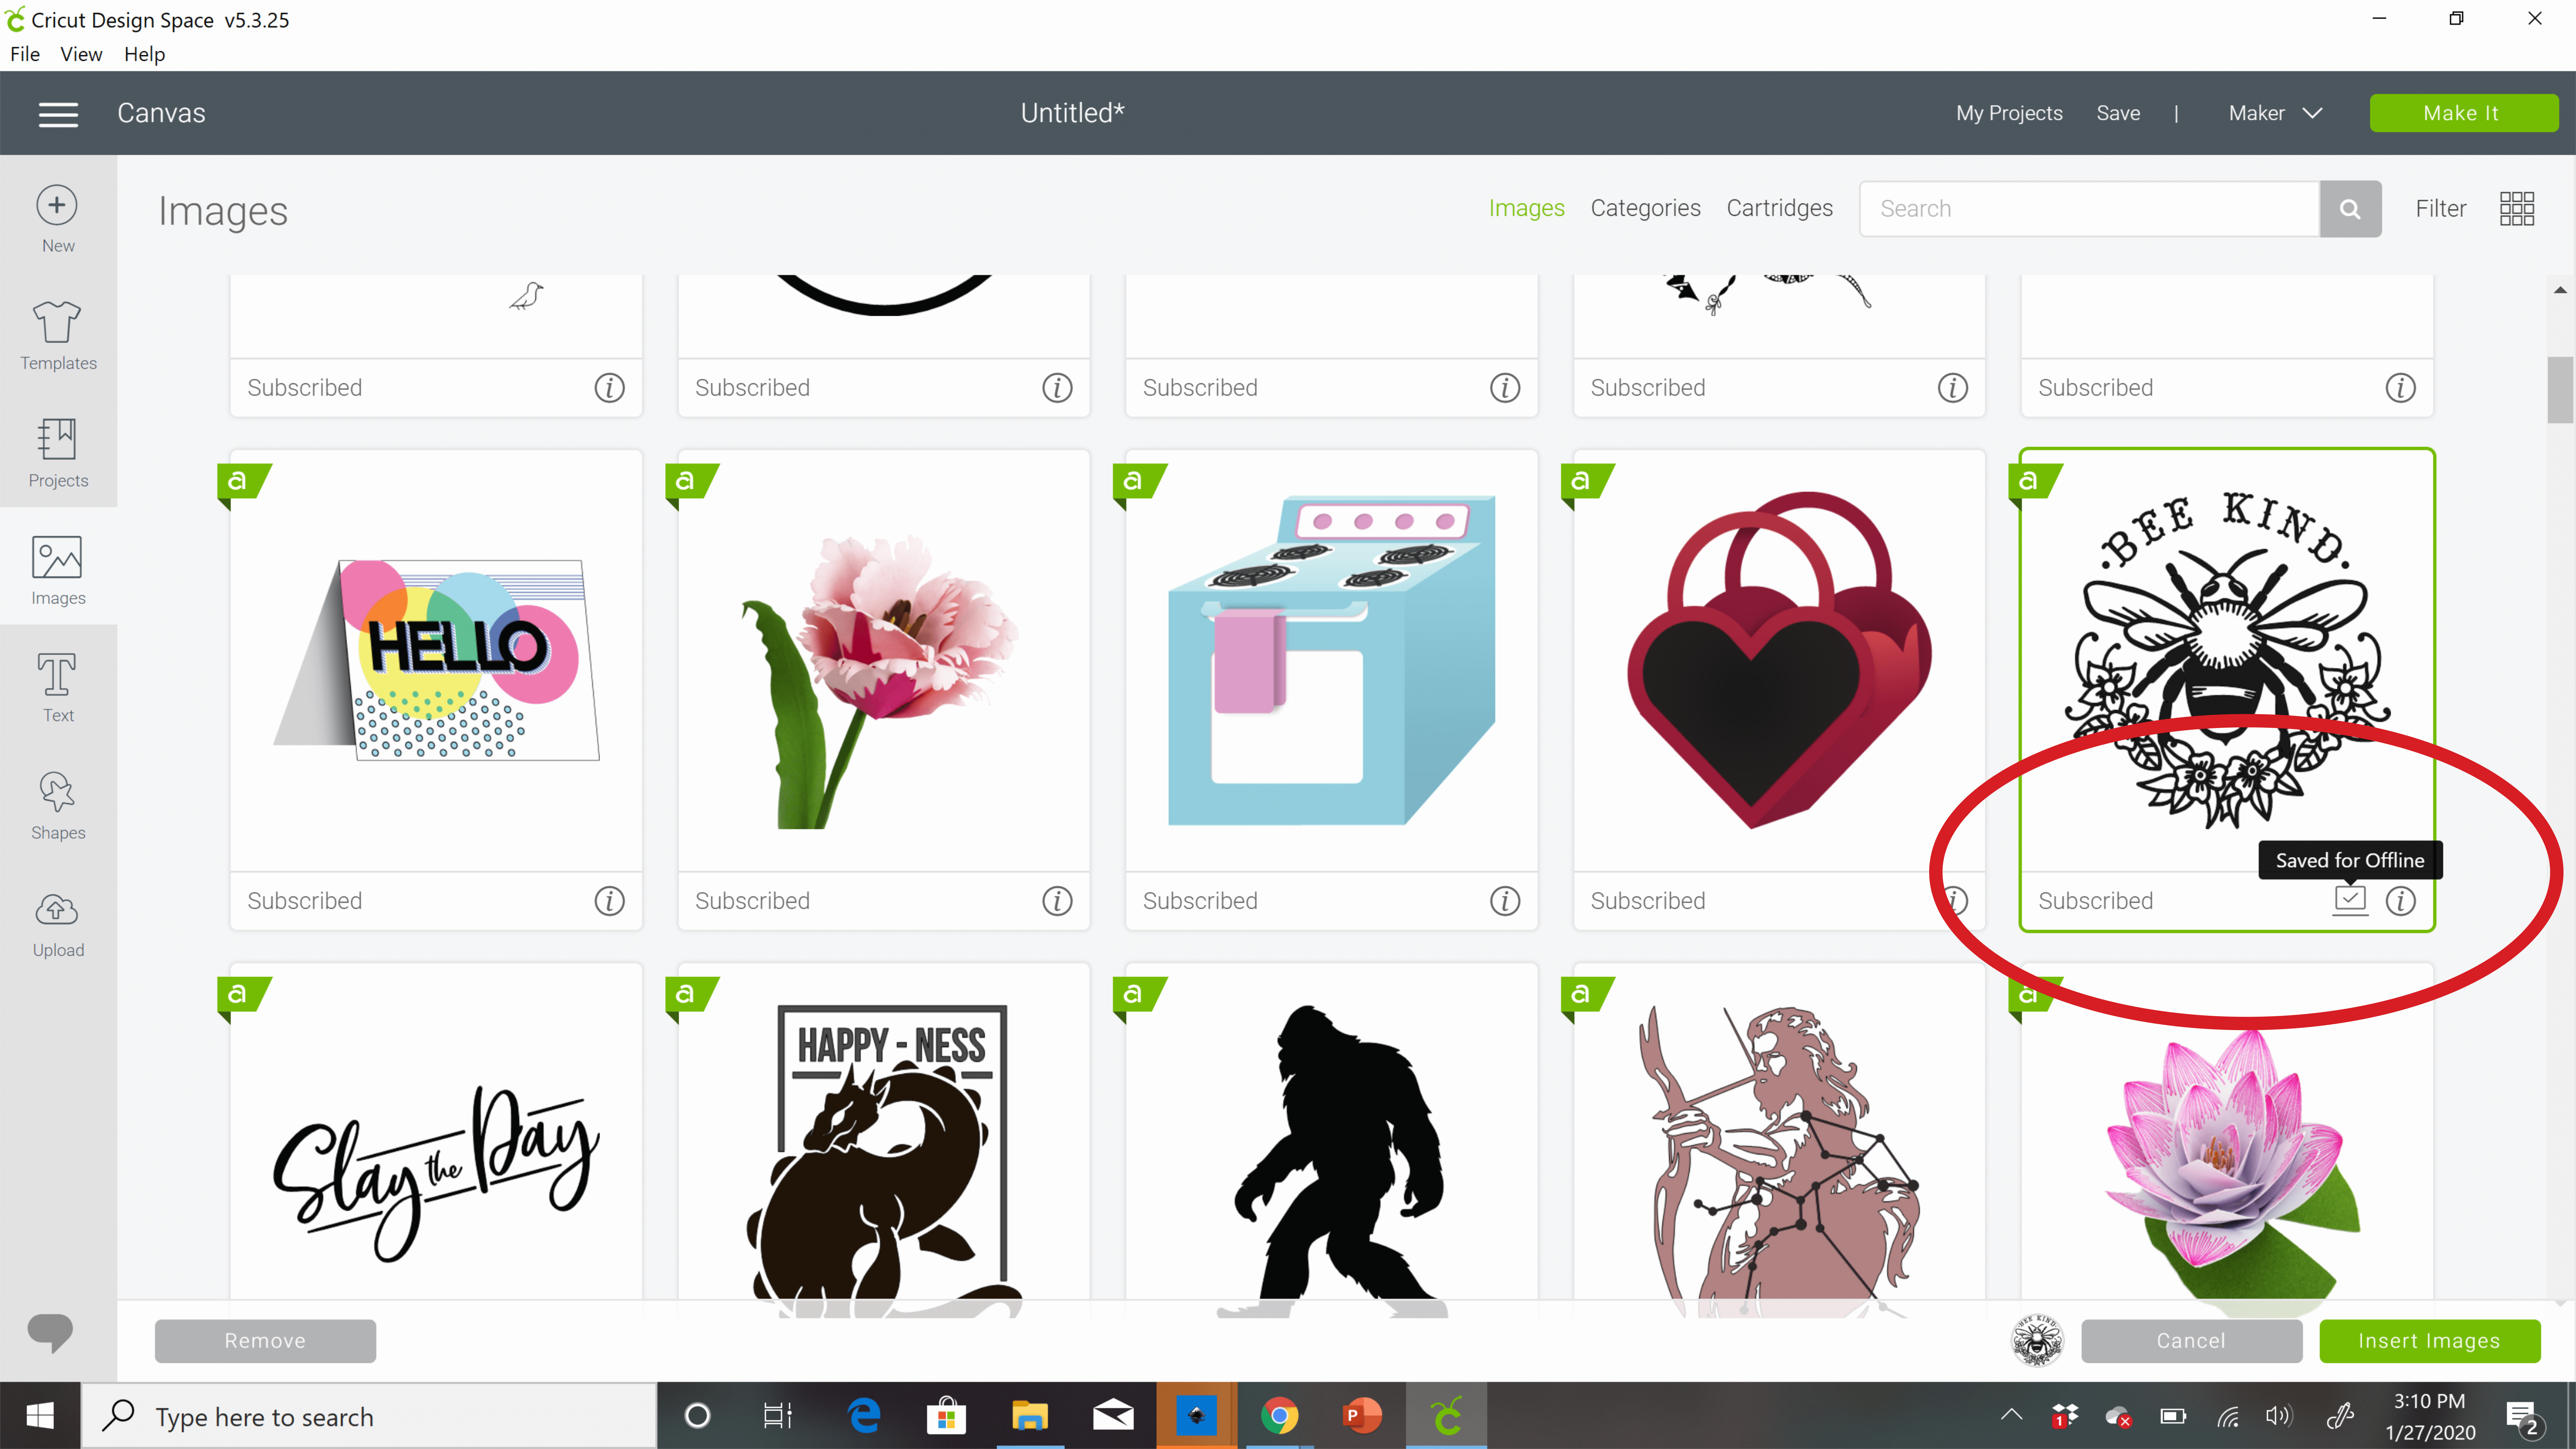 A computer screenshot of the Images section of Cricut Design Space shows various images. A red circle indicates where to click to save an image for offline use.